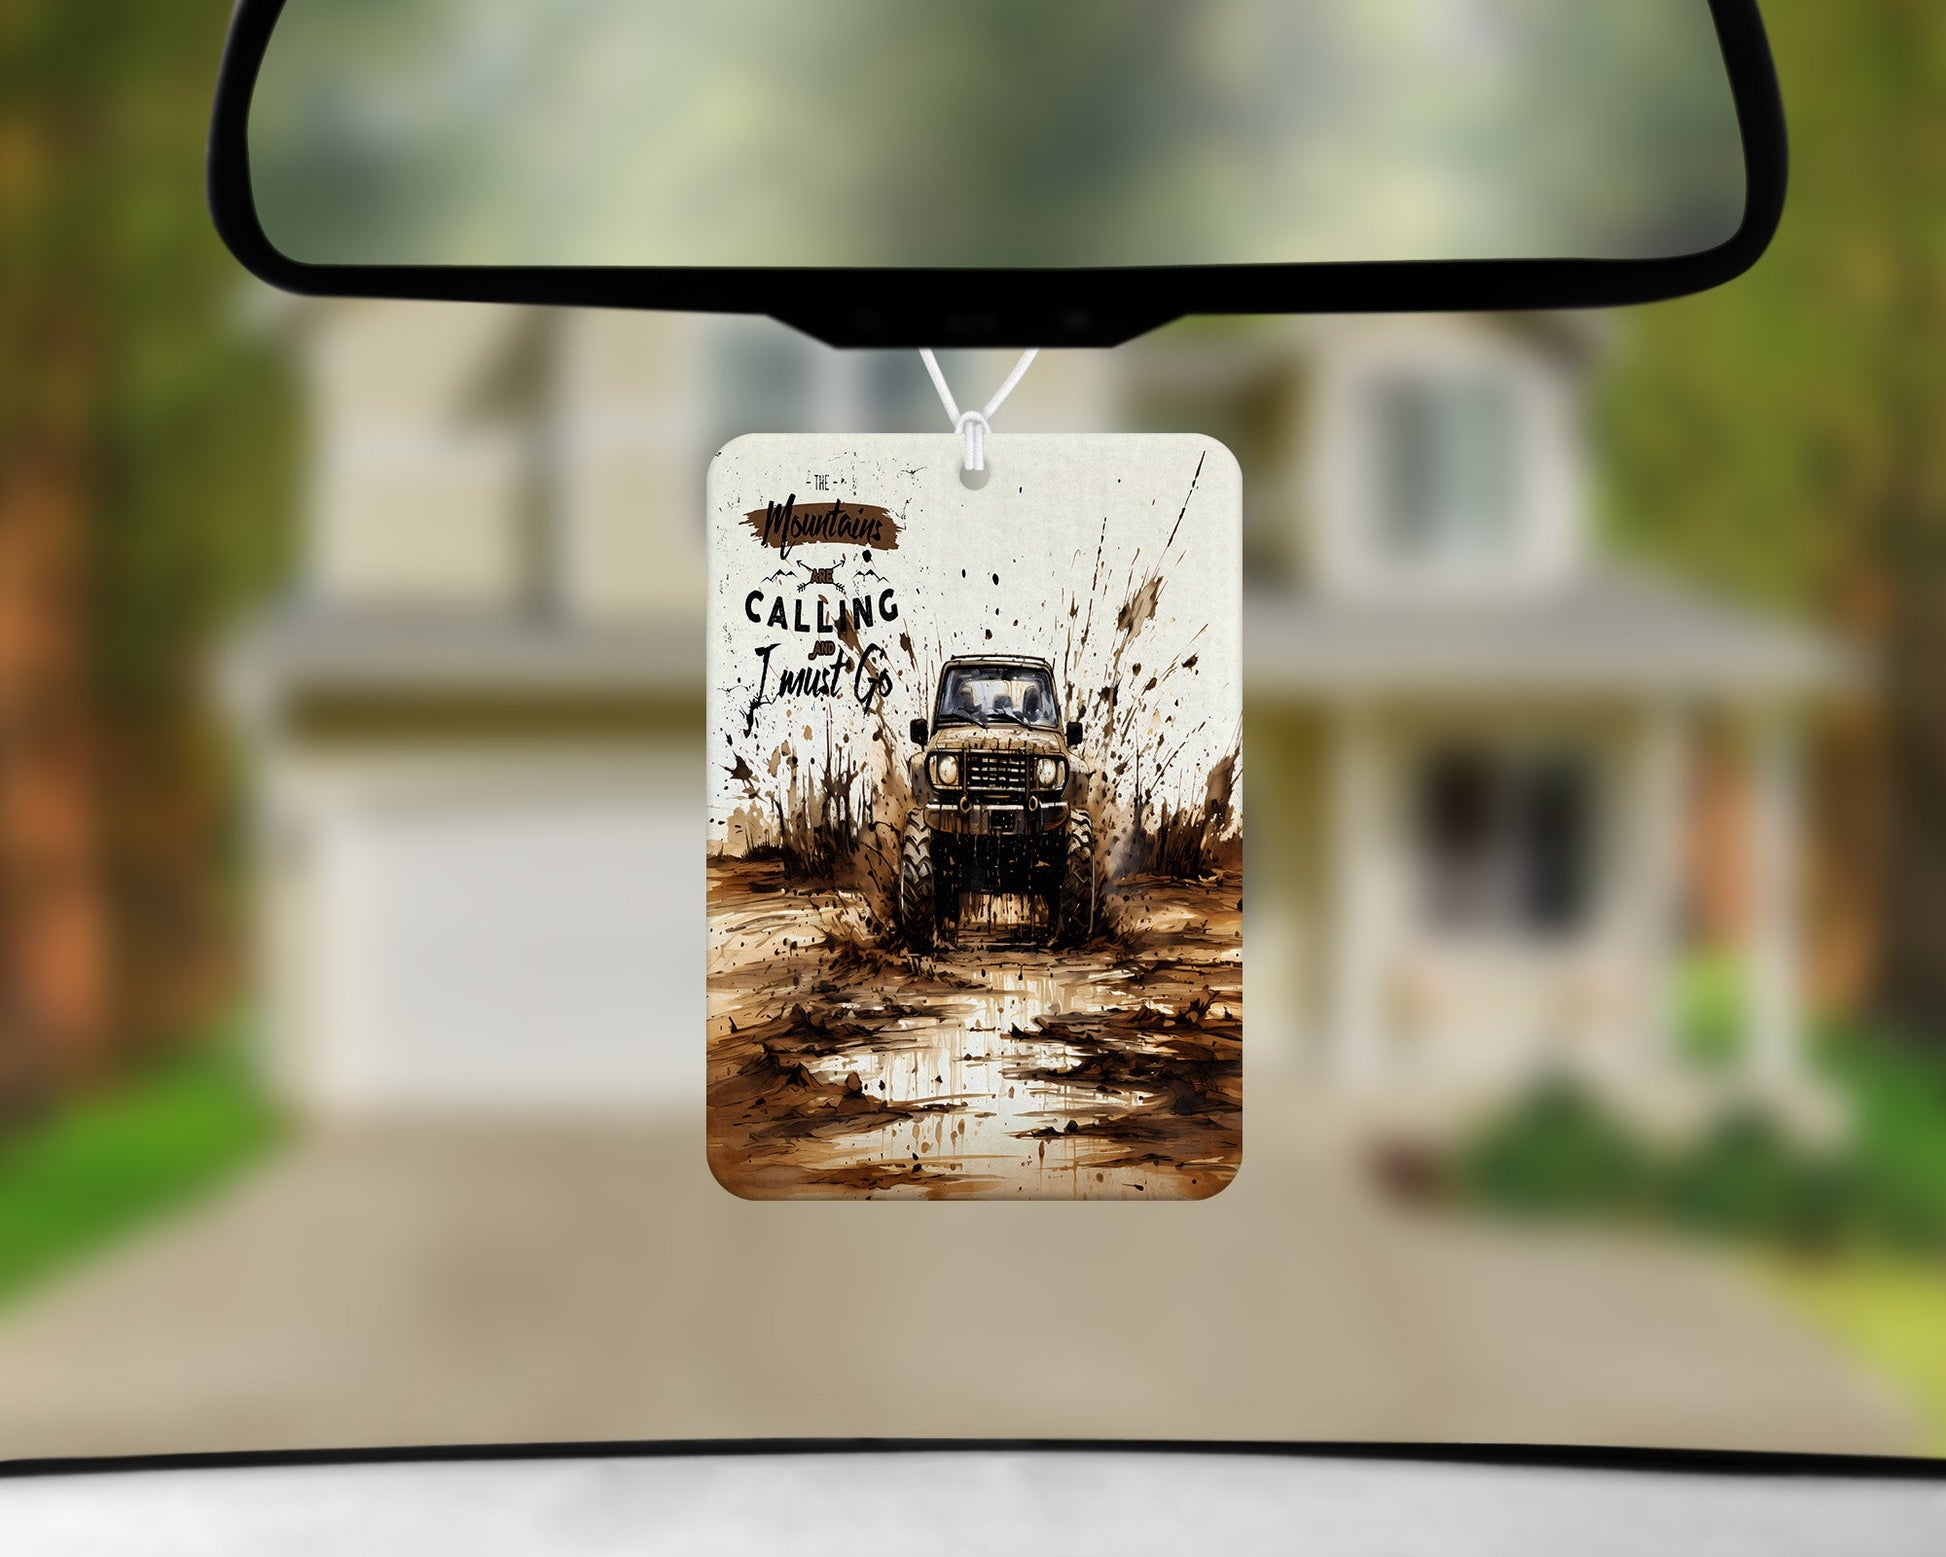 The Mountains Are Calling |Freshie|Includes Scent Bottle - Vehicle Air Freshener